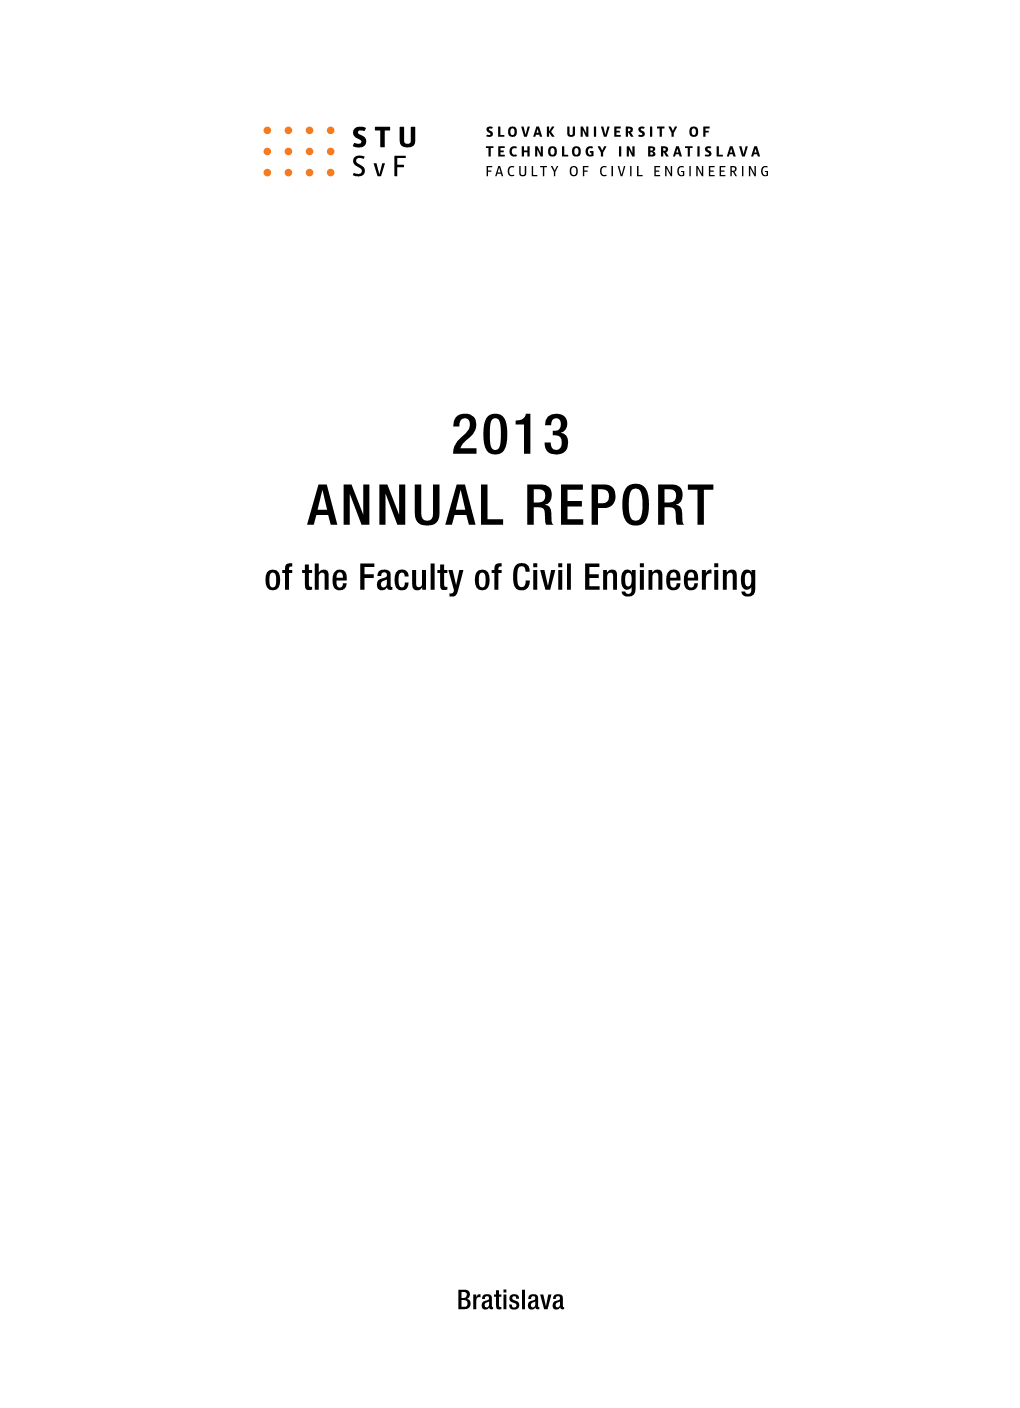 2013 Annual Report of the Faculty of Civil Engineering